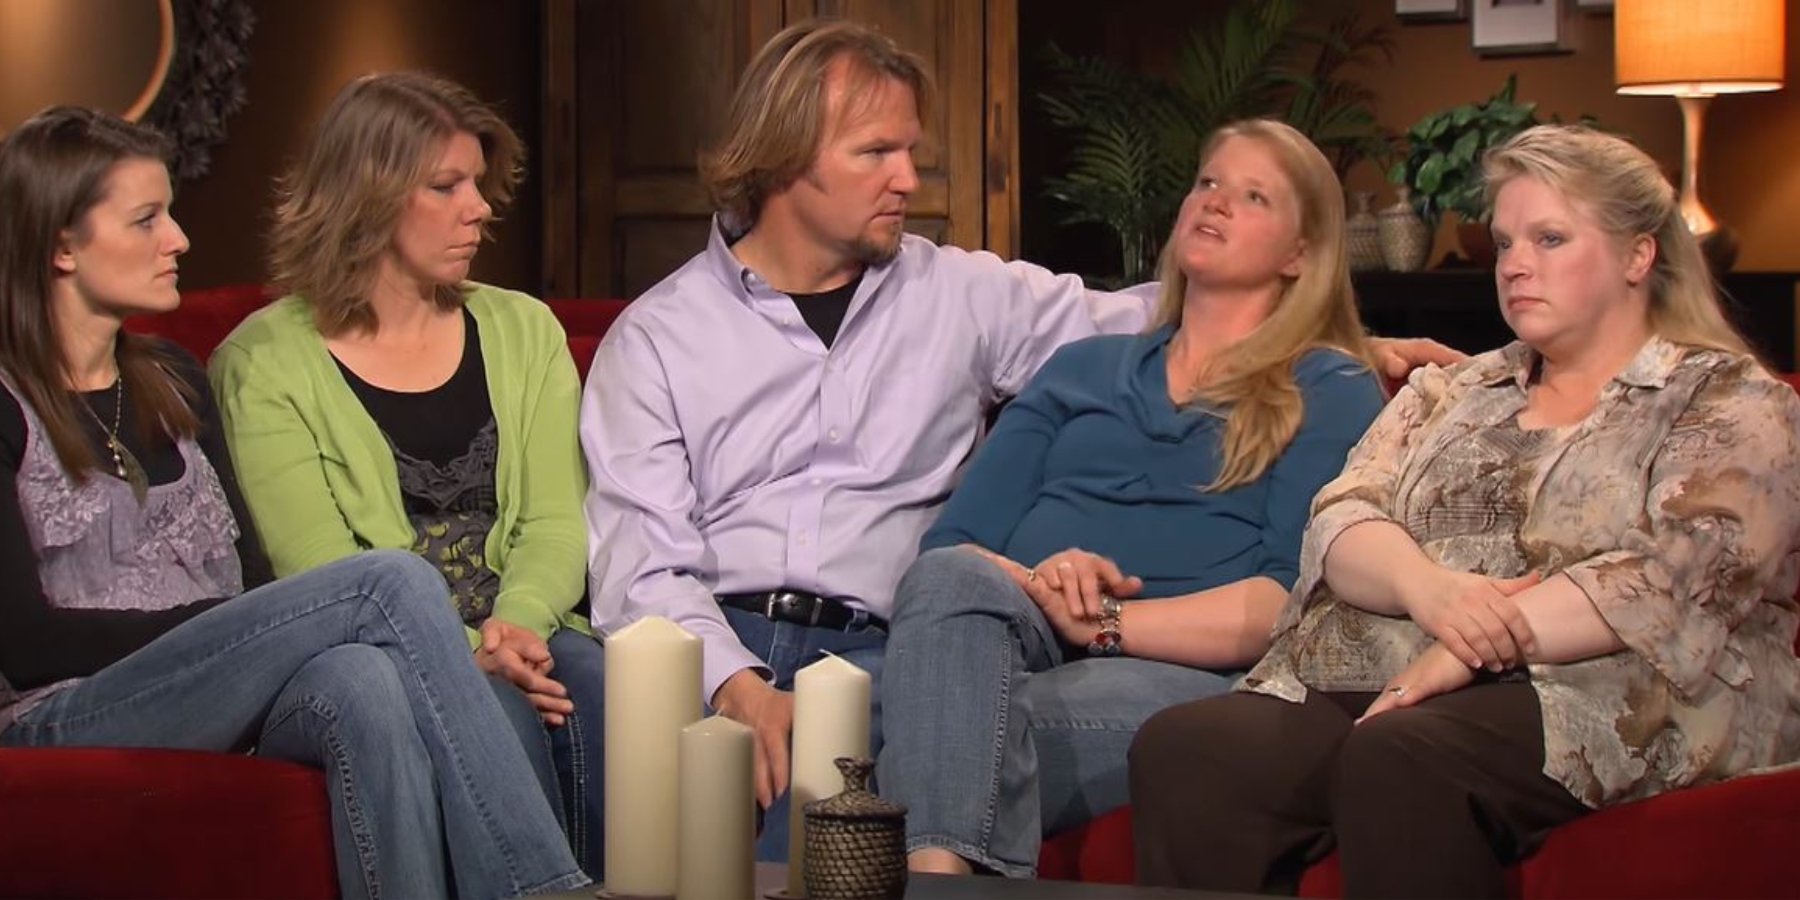 Screenshot of 'Sister Wives' season 1 with Robyn, Meri, Kody, Christine and Janelle Brown.